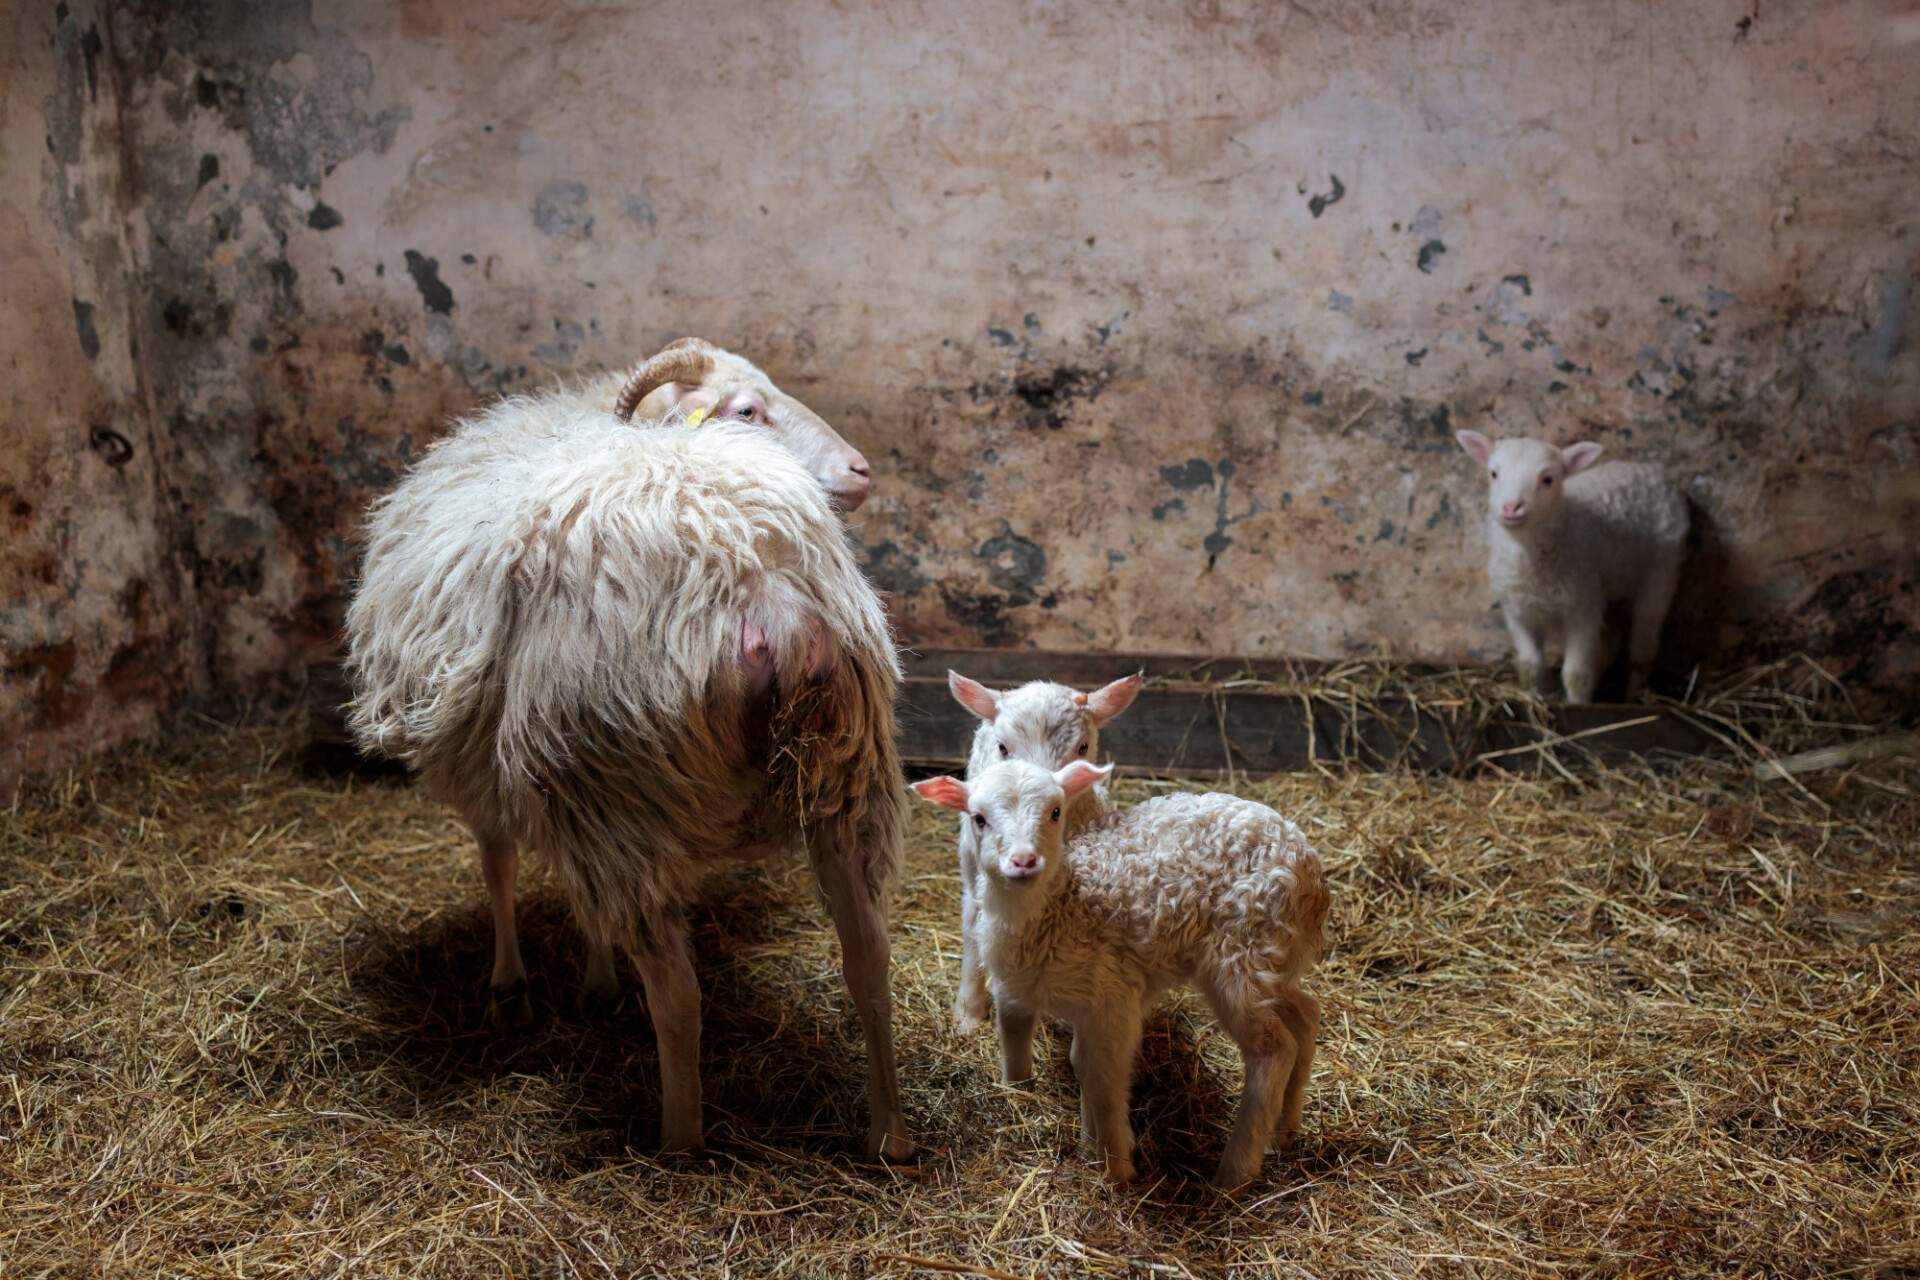 Sheep with lambs in stable